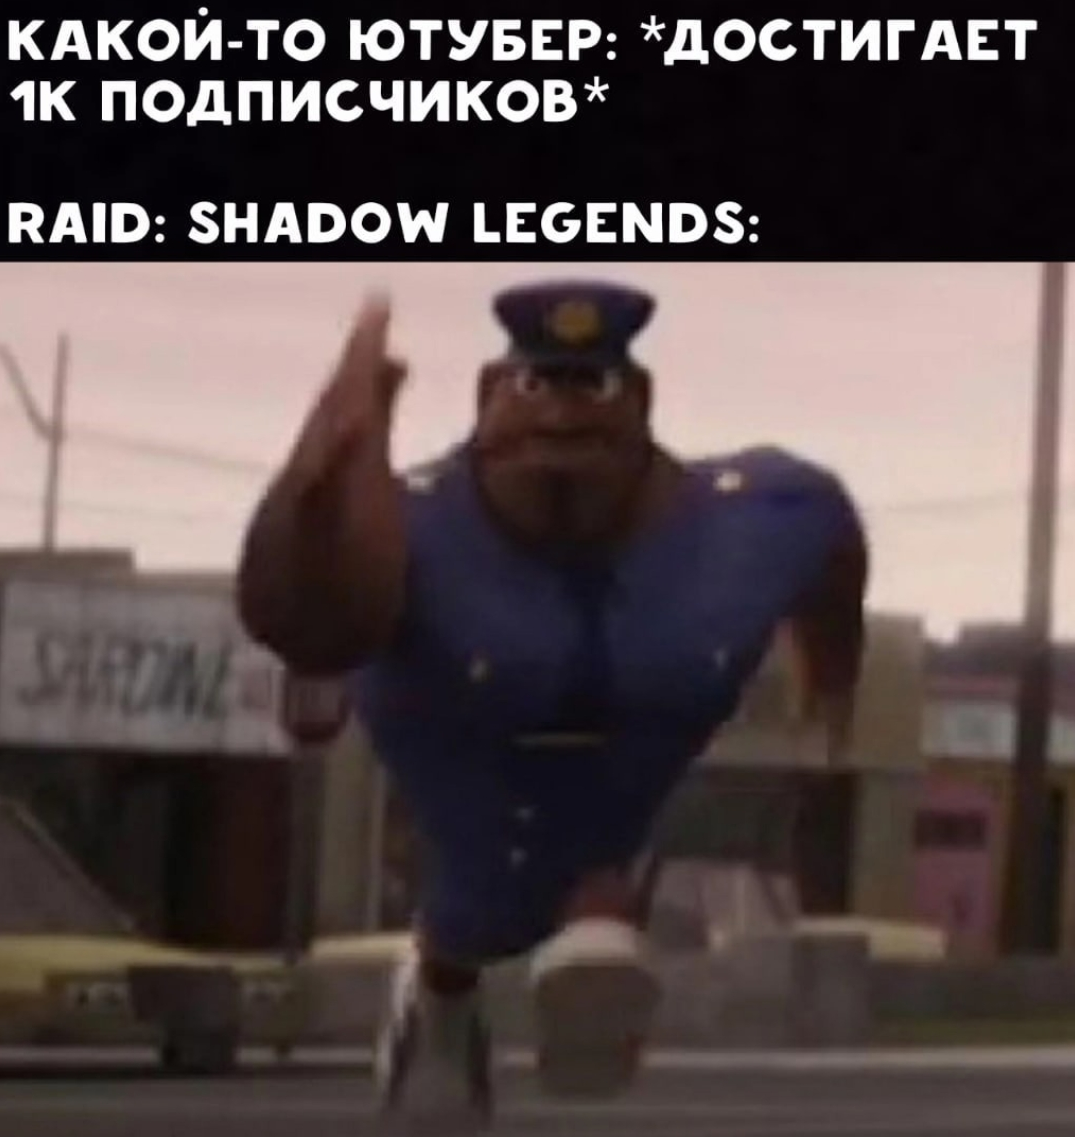 The Omnipresent Evil - Raid Shadow Legends, Youtube, Humor, Games, Memes, Picture with text